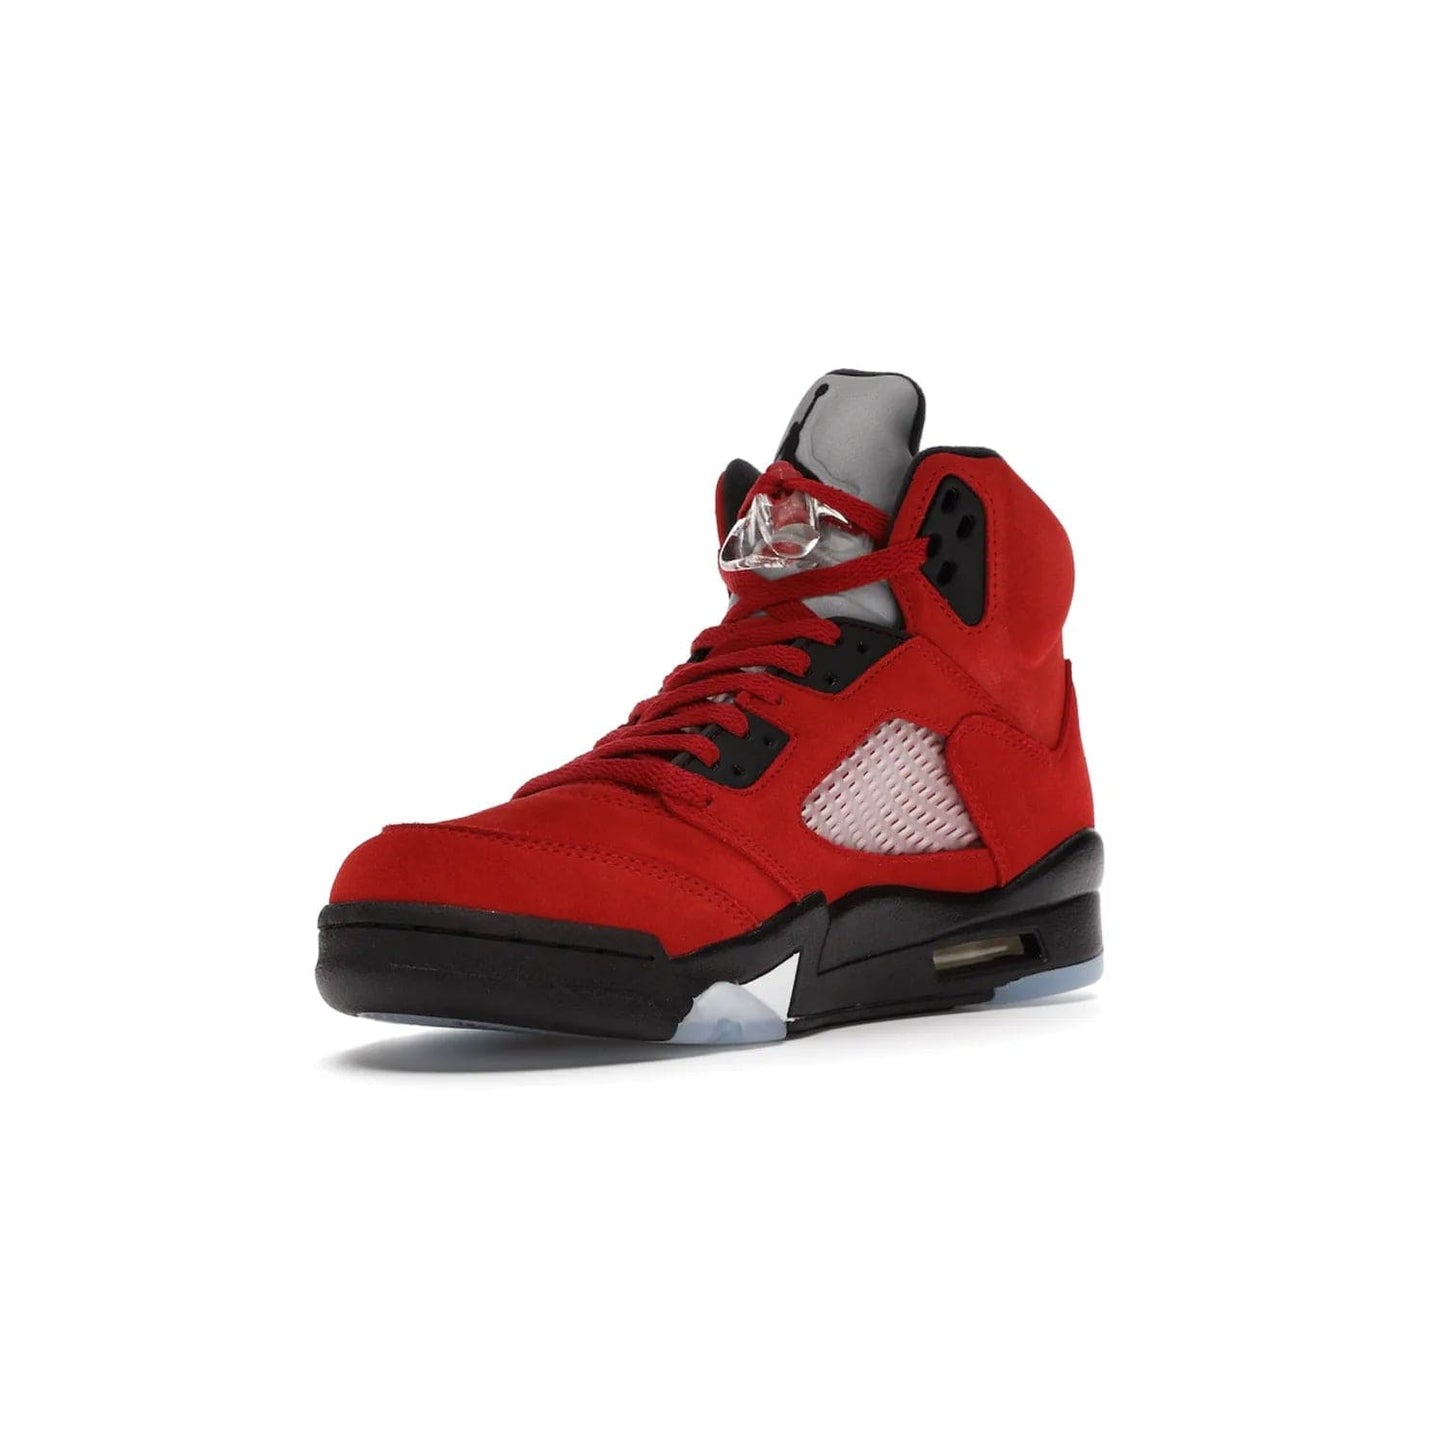 Jordan 5 Retro Raging Bull Red (2021) - Image 14 - Only at www.BallersClubKickz.com - Get ready for the 2021 stand-alone release of the Air Jordan 5 Raging Bulls! This all-suede upper combines luxe details like a Jumpman logo, red & black "23" embroidery and shark tooth detailing, atop a black midsole. Don't miss out - release date in April 2021 for $190.